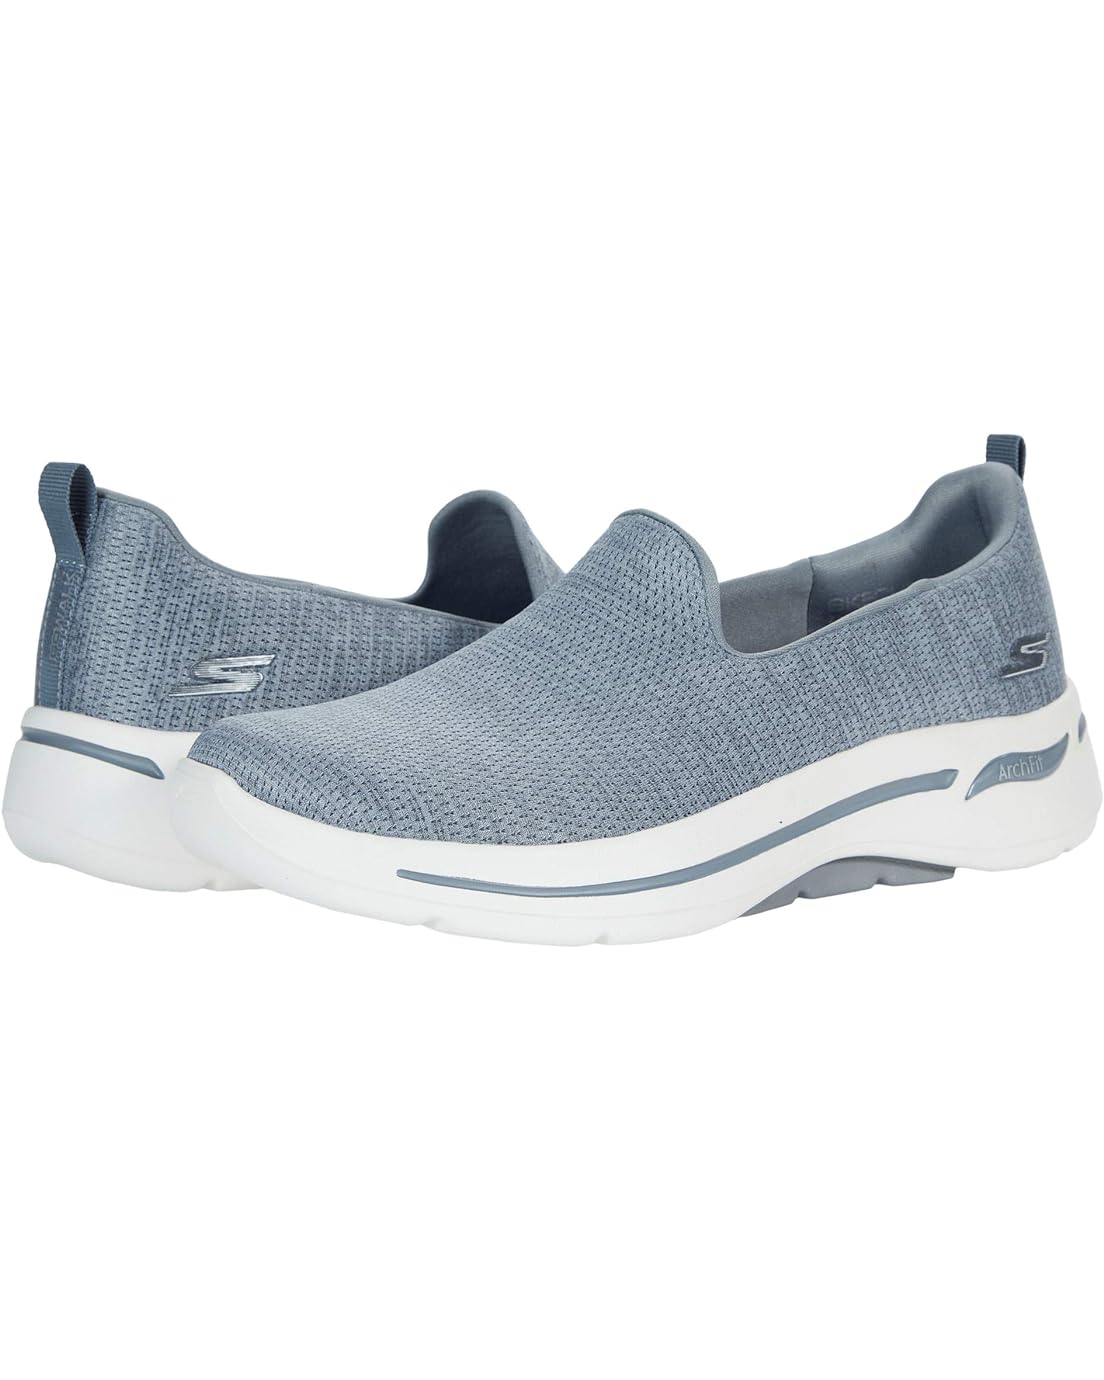 SKECHERS Performance Go Walk Arch Fit Unlimited Time